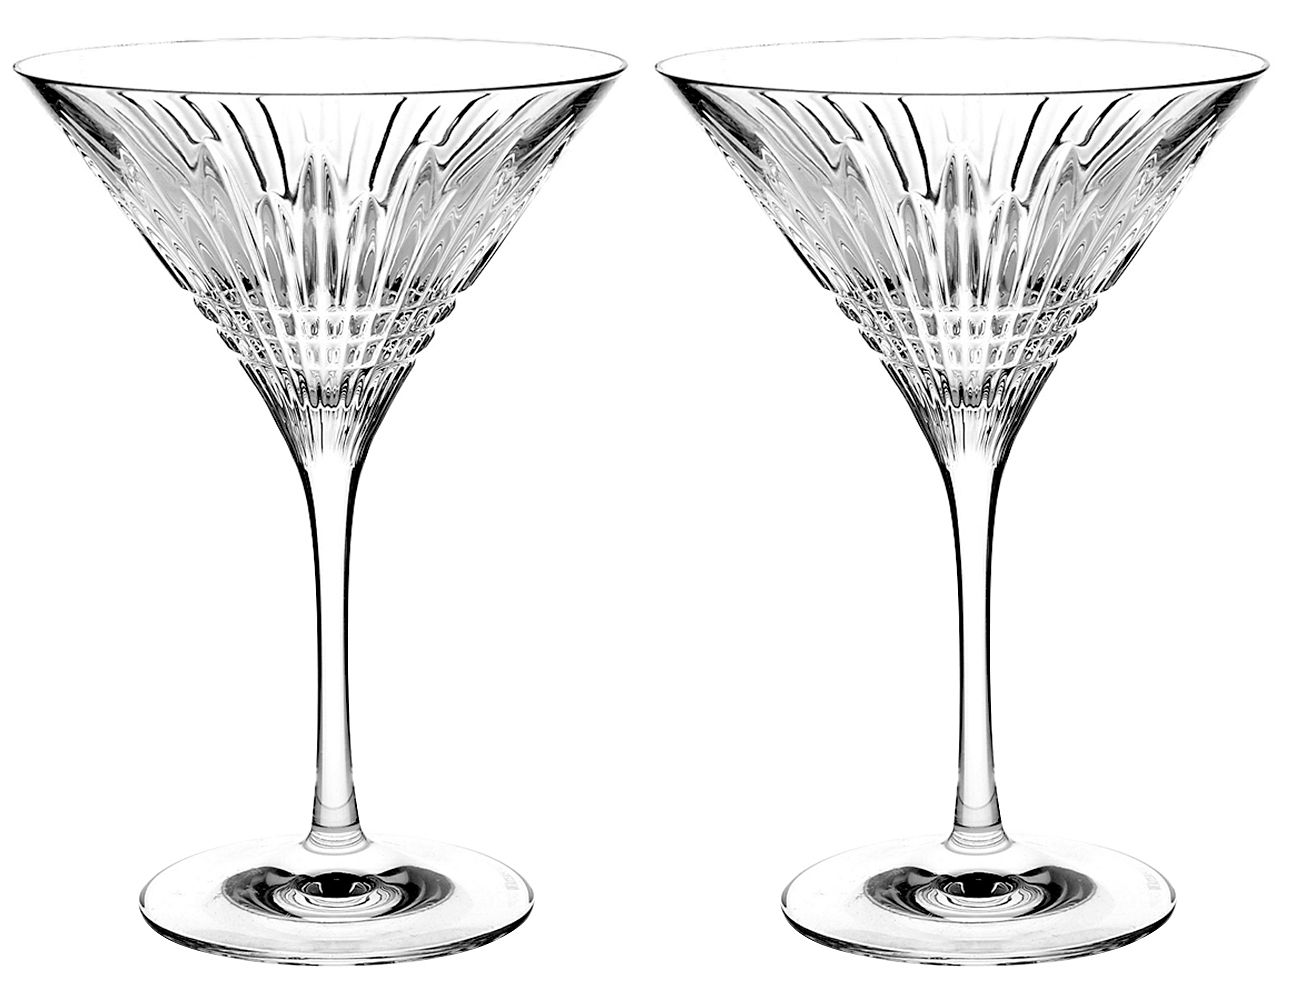 Waterford Crystal's Lismore Diamond Collection